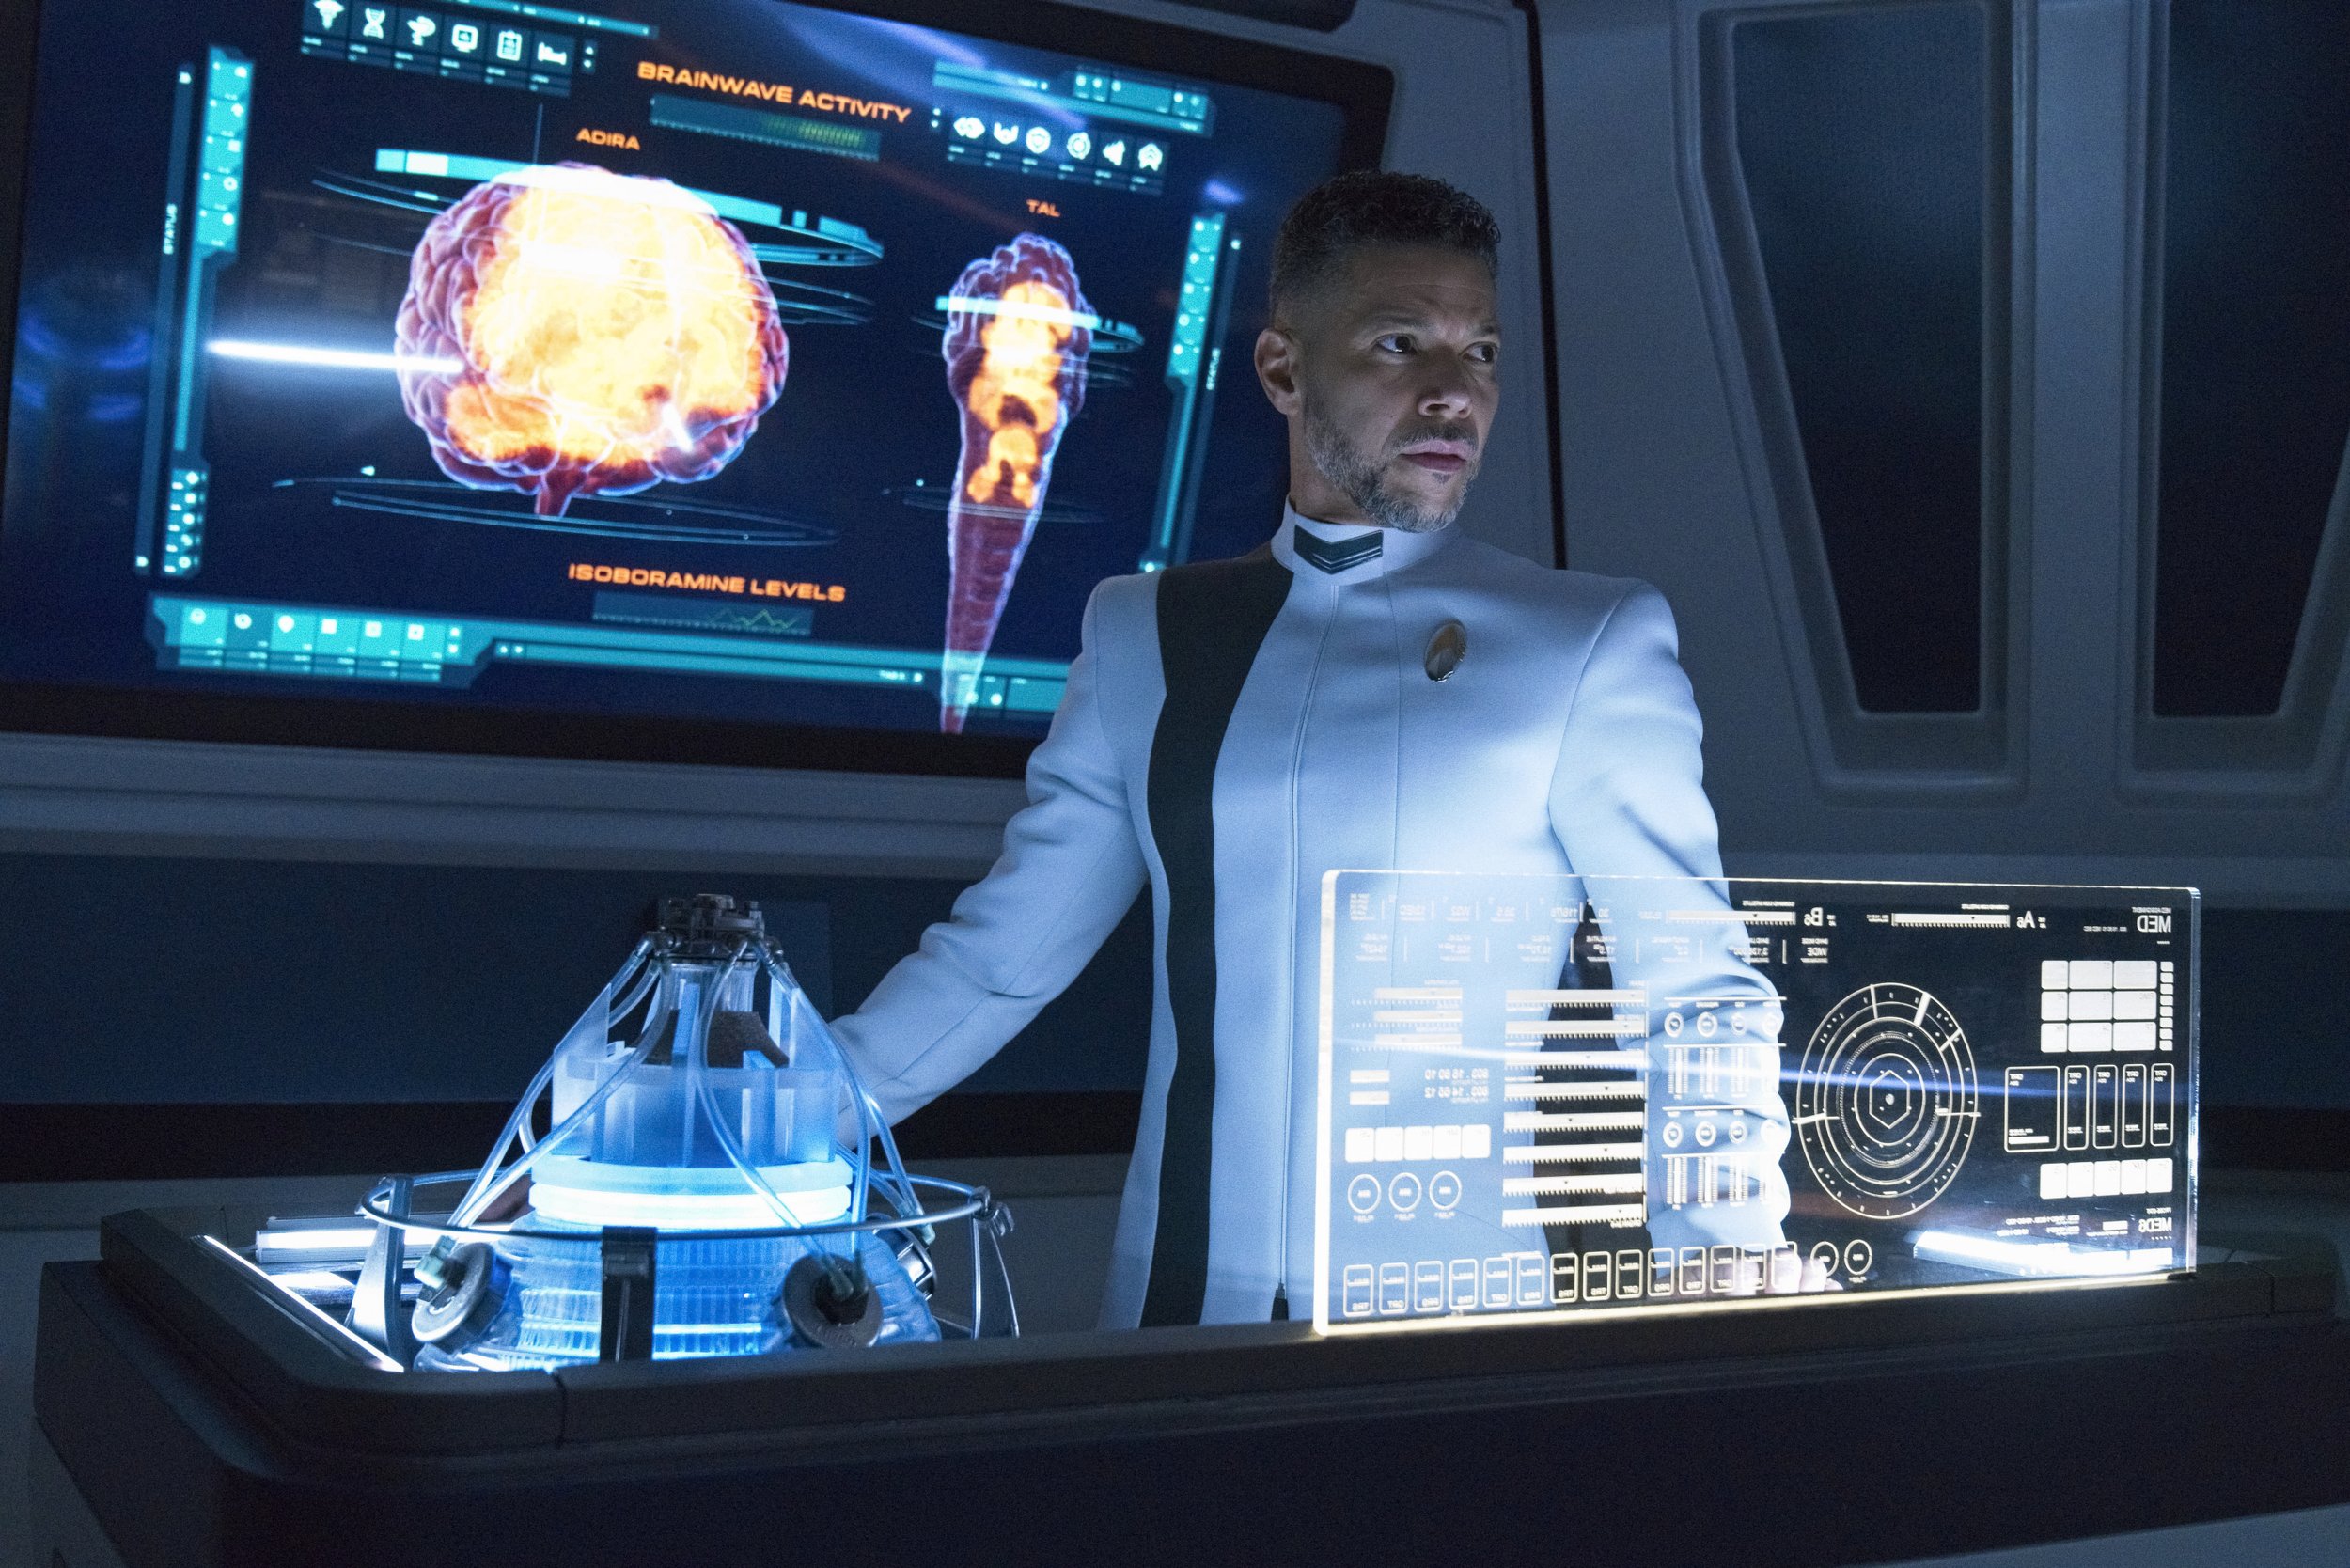   Pictured: Wilson Cruz as Culber of the Paramount+ original series STAR TREK: DISCOVERY. Photo Cr: Michael Gibson/Paramount+ © 2021 CBS Interactive. All Rights Reserved.  